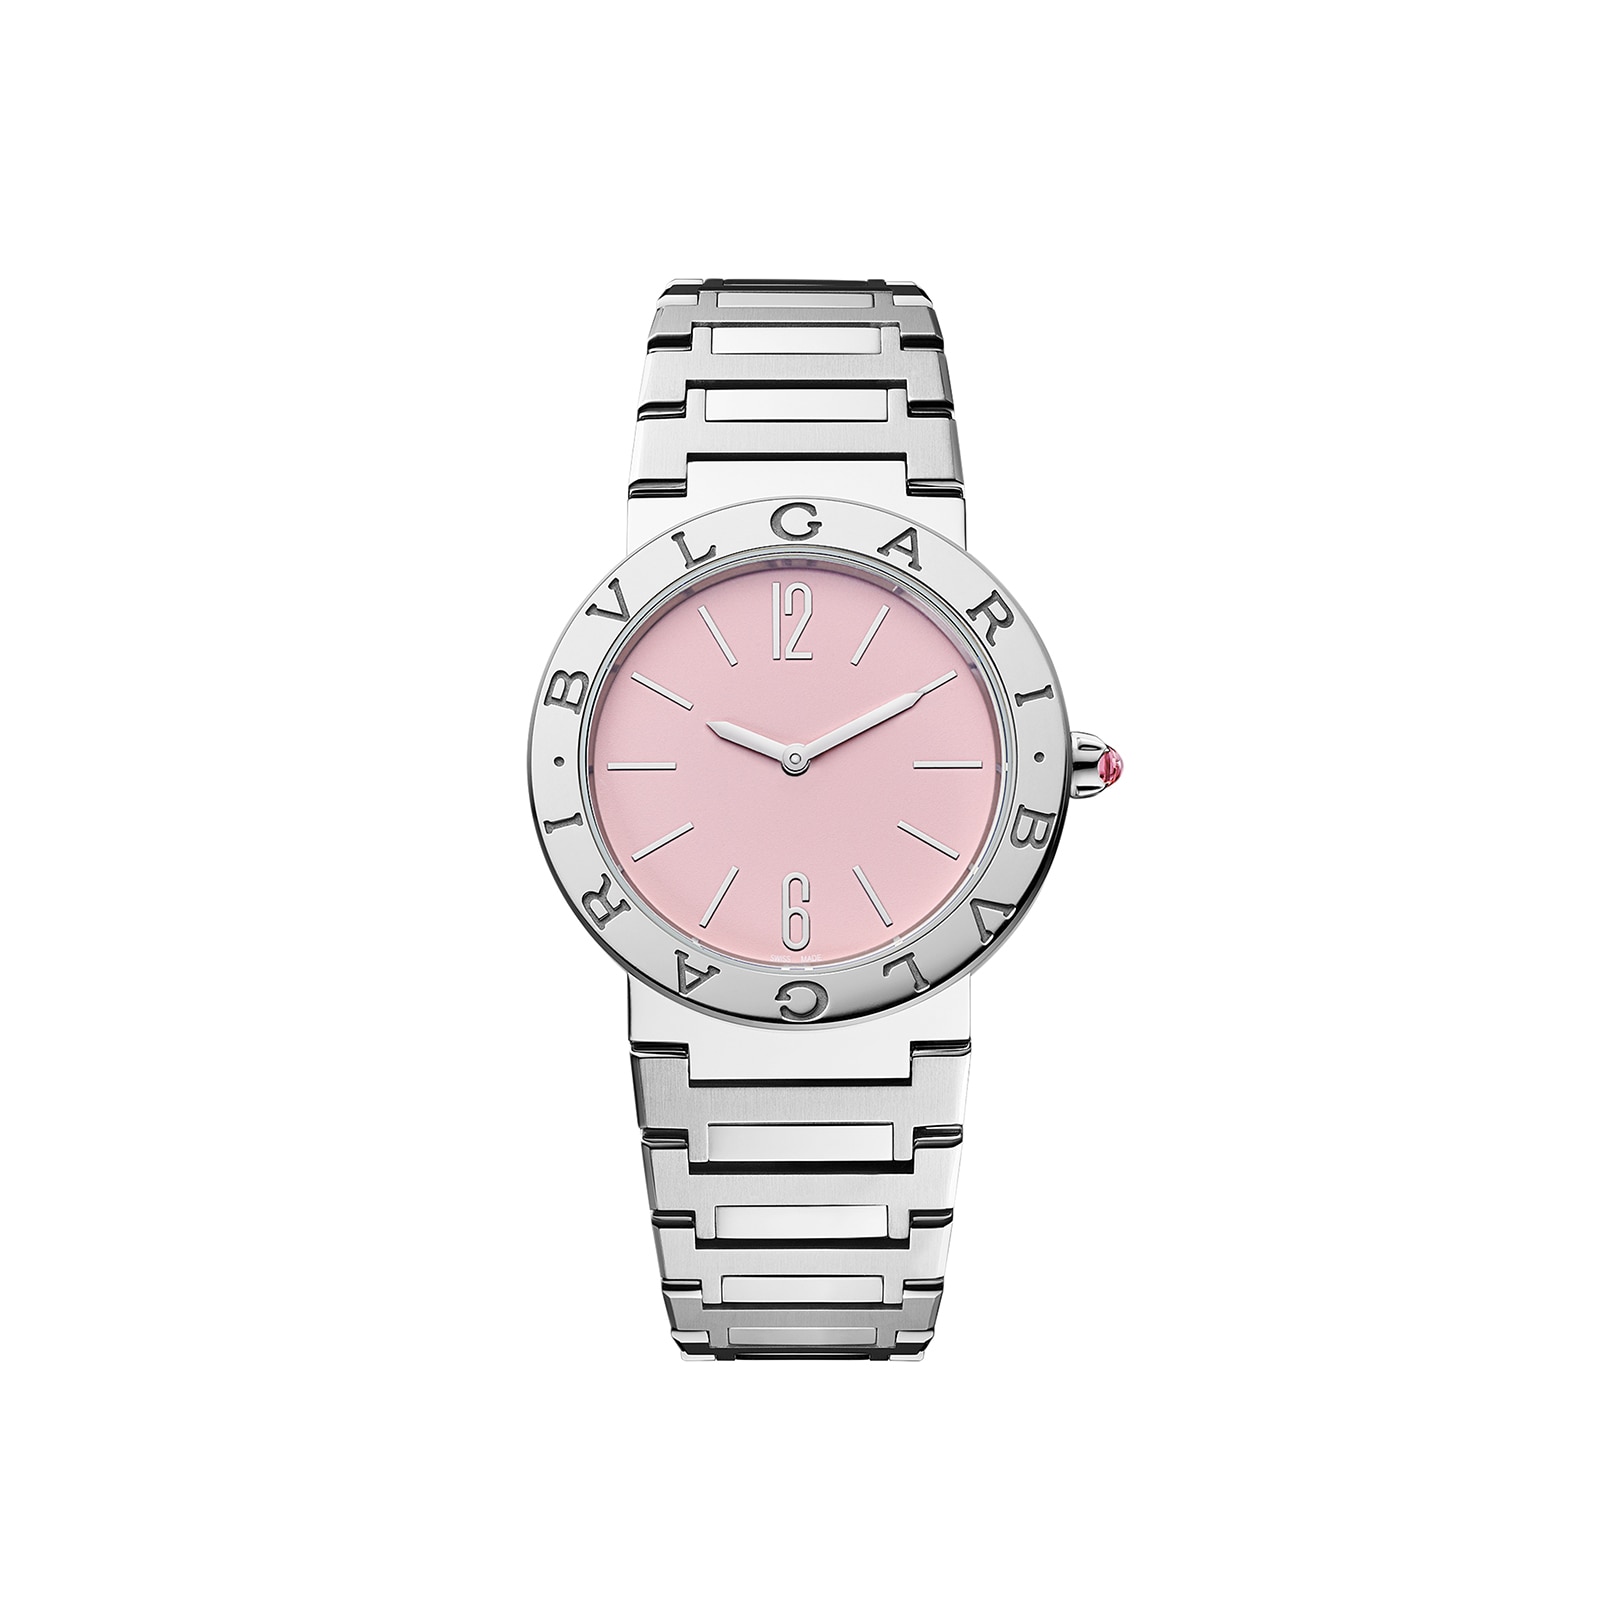 Swiss Ladies Watches, Luxury Watches for Women, Female Watches for Sale ...